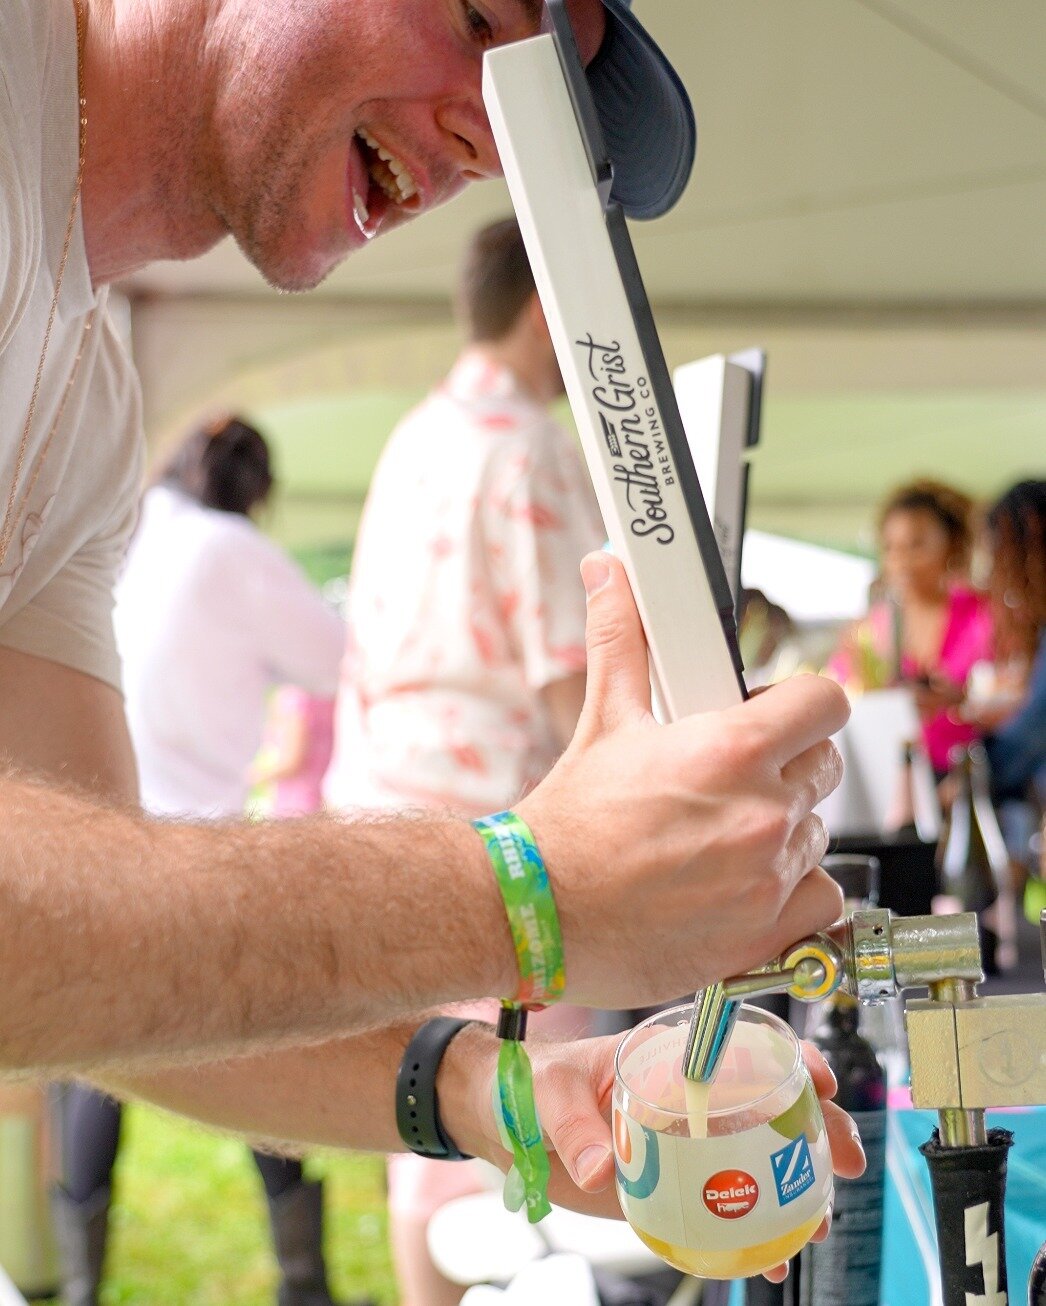 Craft beer for the rebels, ros&eacute; for the romantics. Choose your liquid adventure wisely!
🍺🌹
Nashville Ros&eacute; Festival presented by Zander Insurance benefits the Tennessee Breast Cancer Coalition and takes place Saturday, May 18 at East P